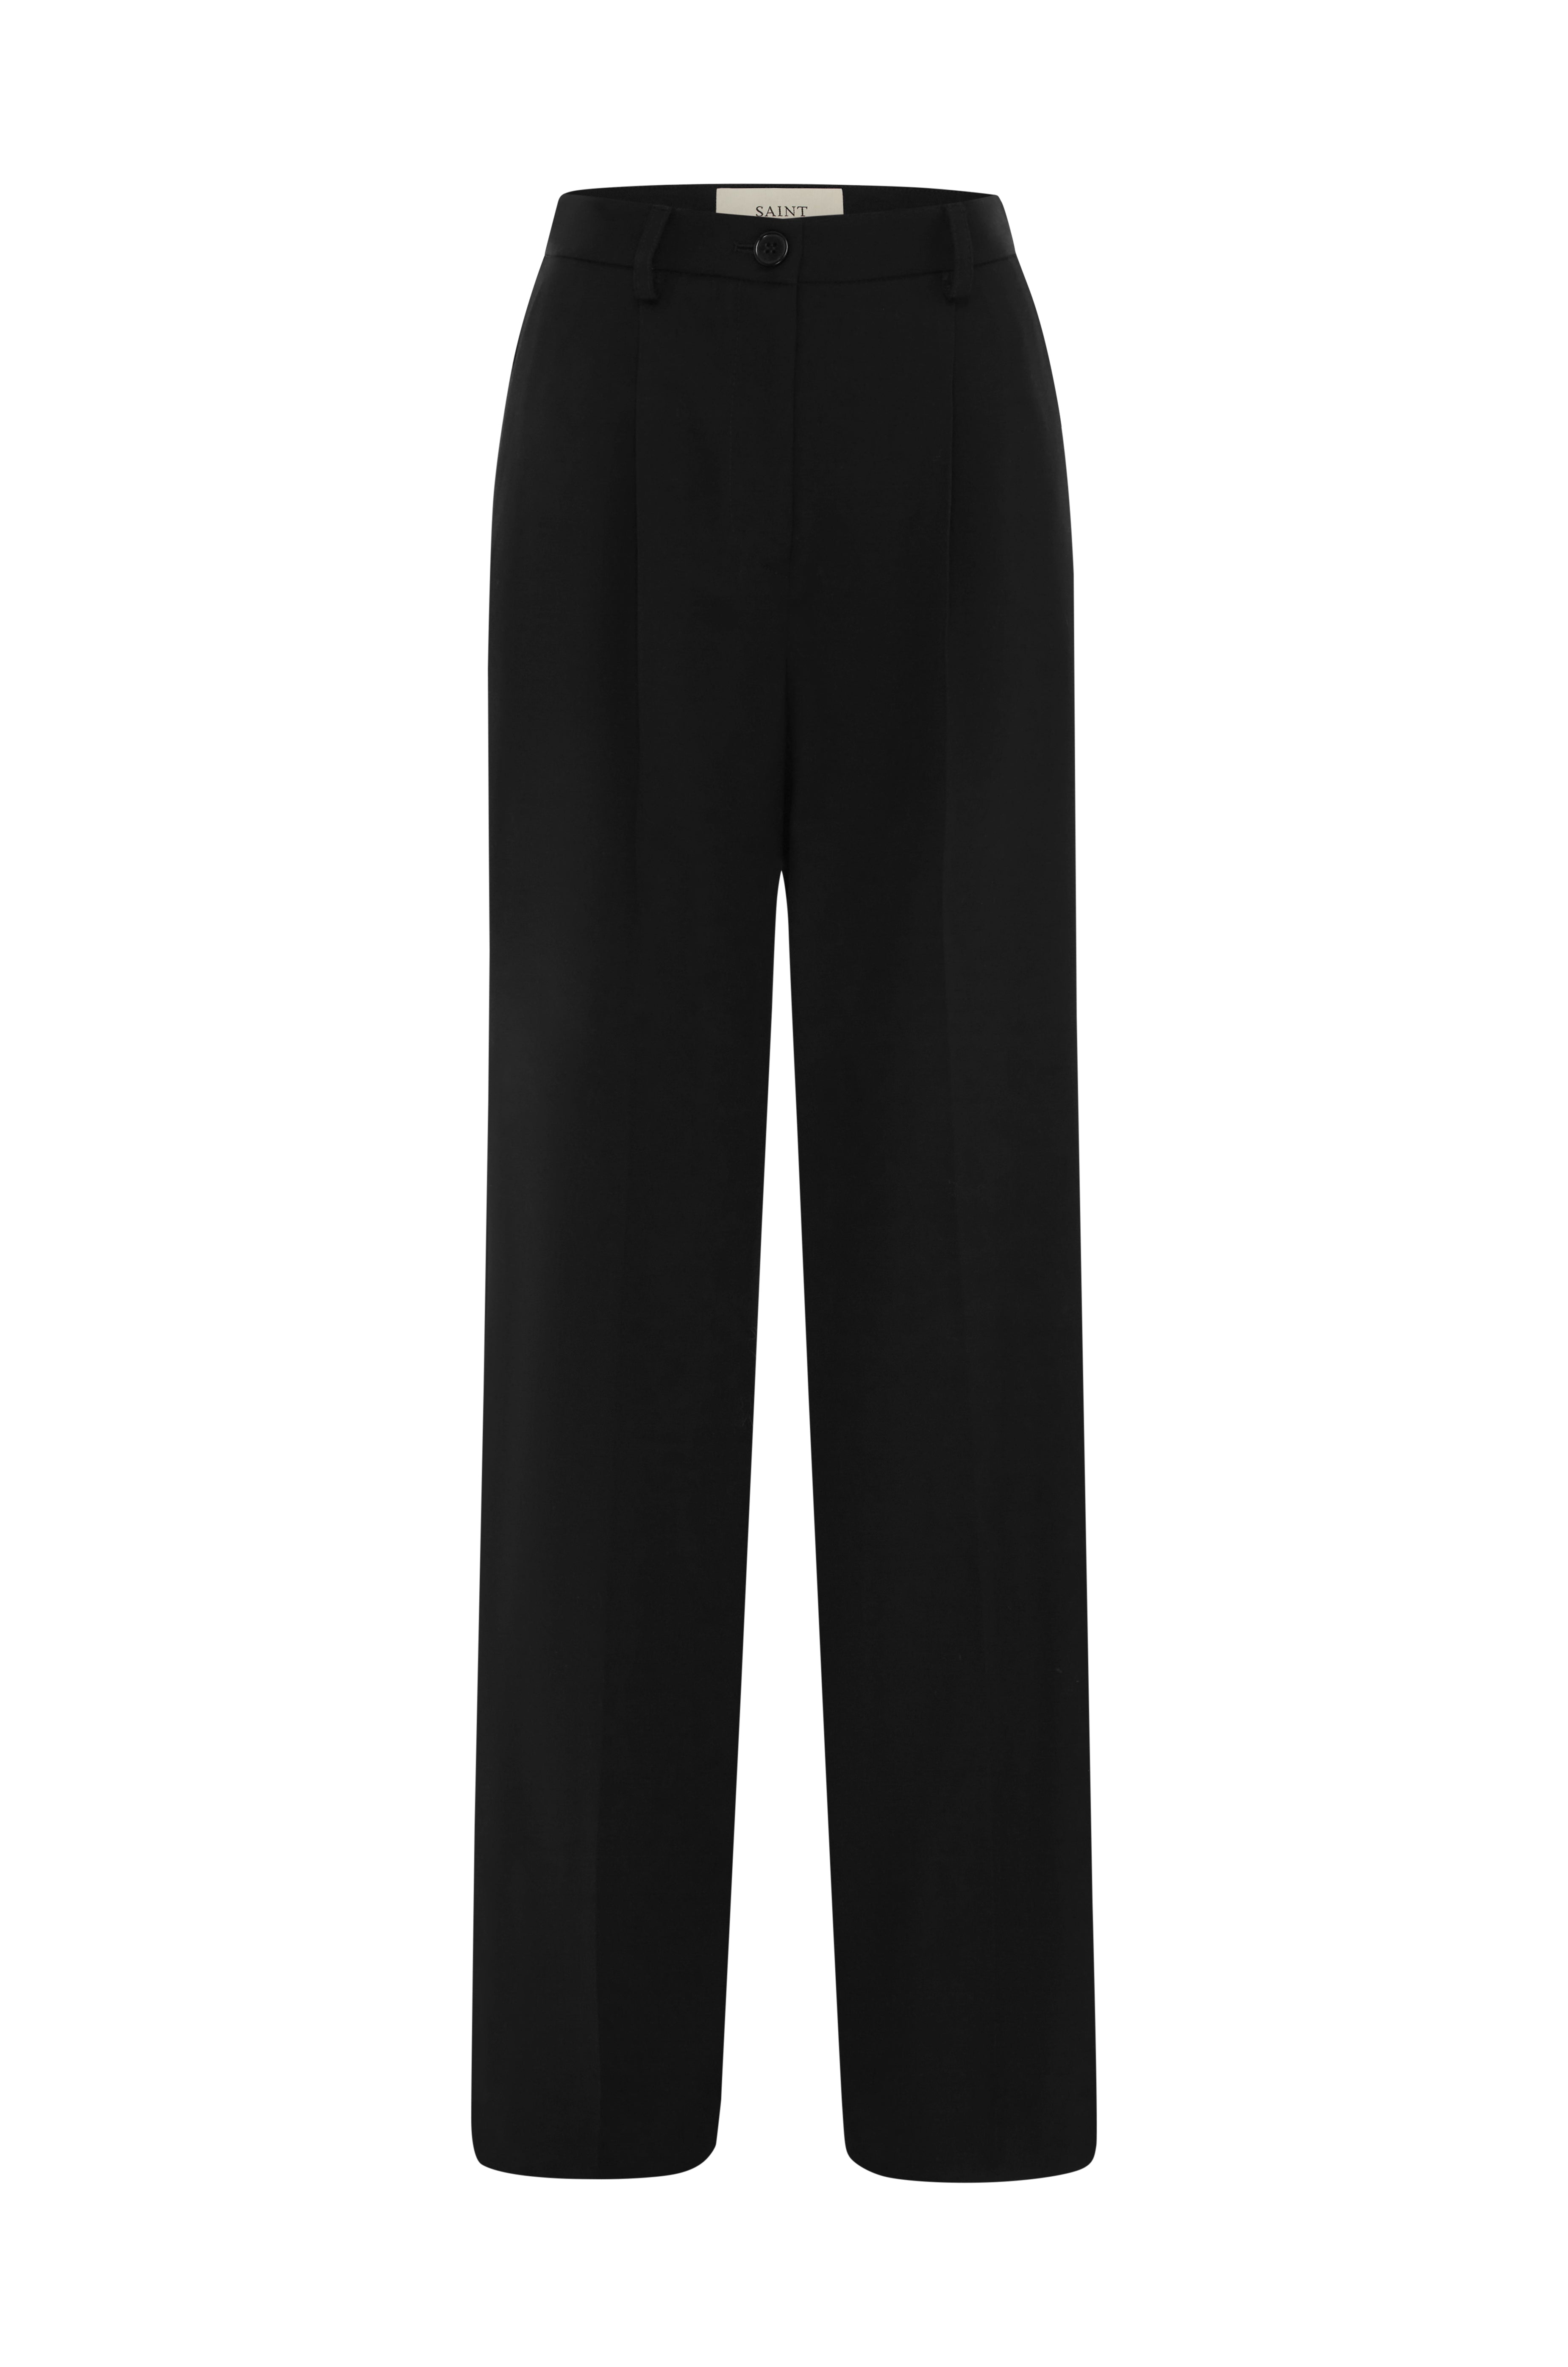 SAINT Tailored Pant in black pure wool. made in Australia. 100% wool